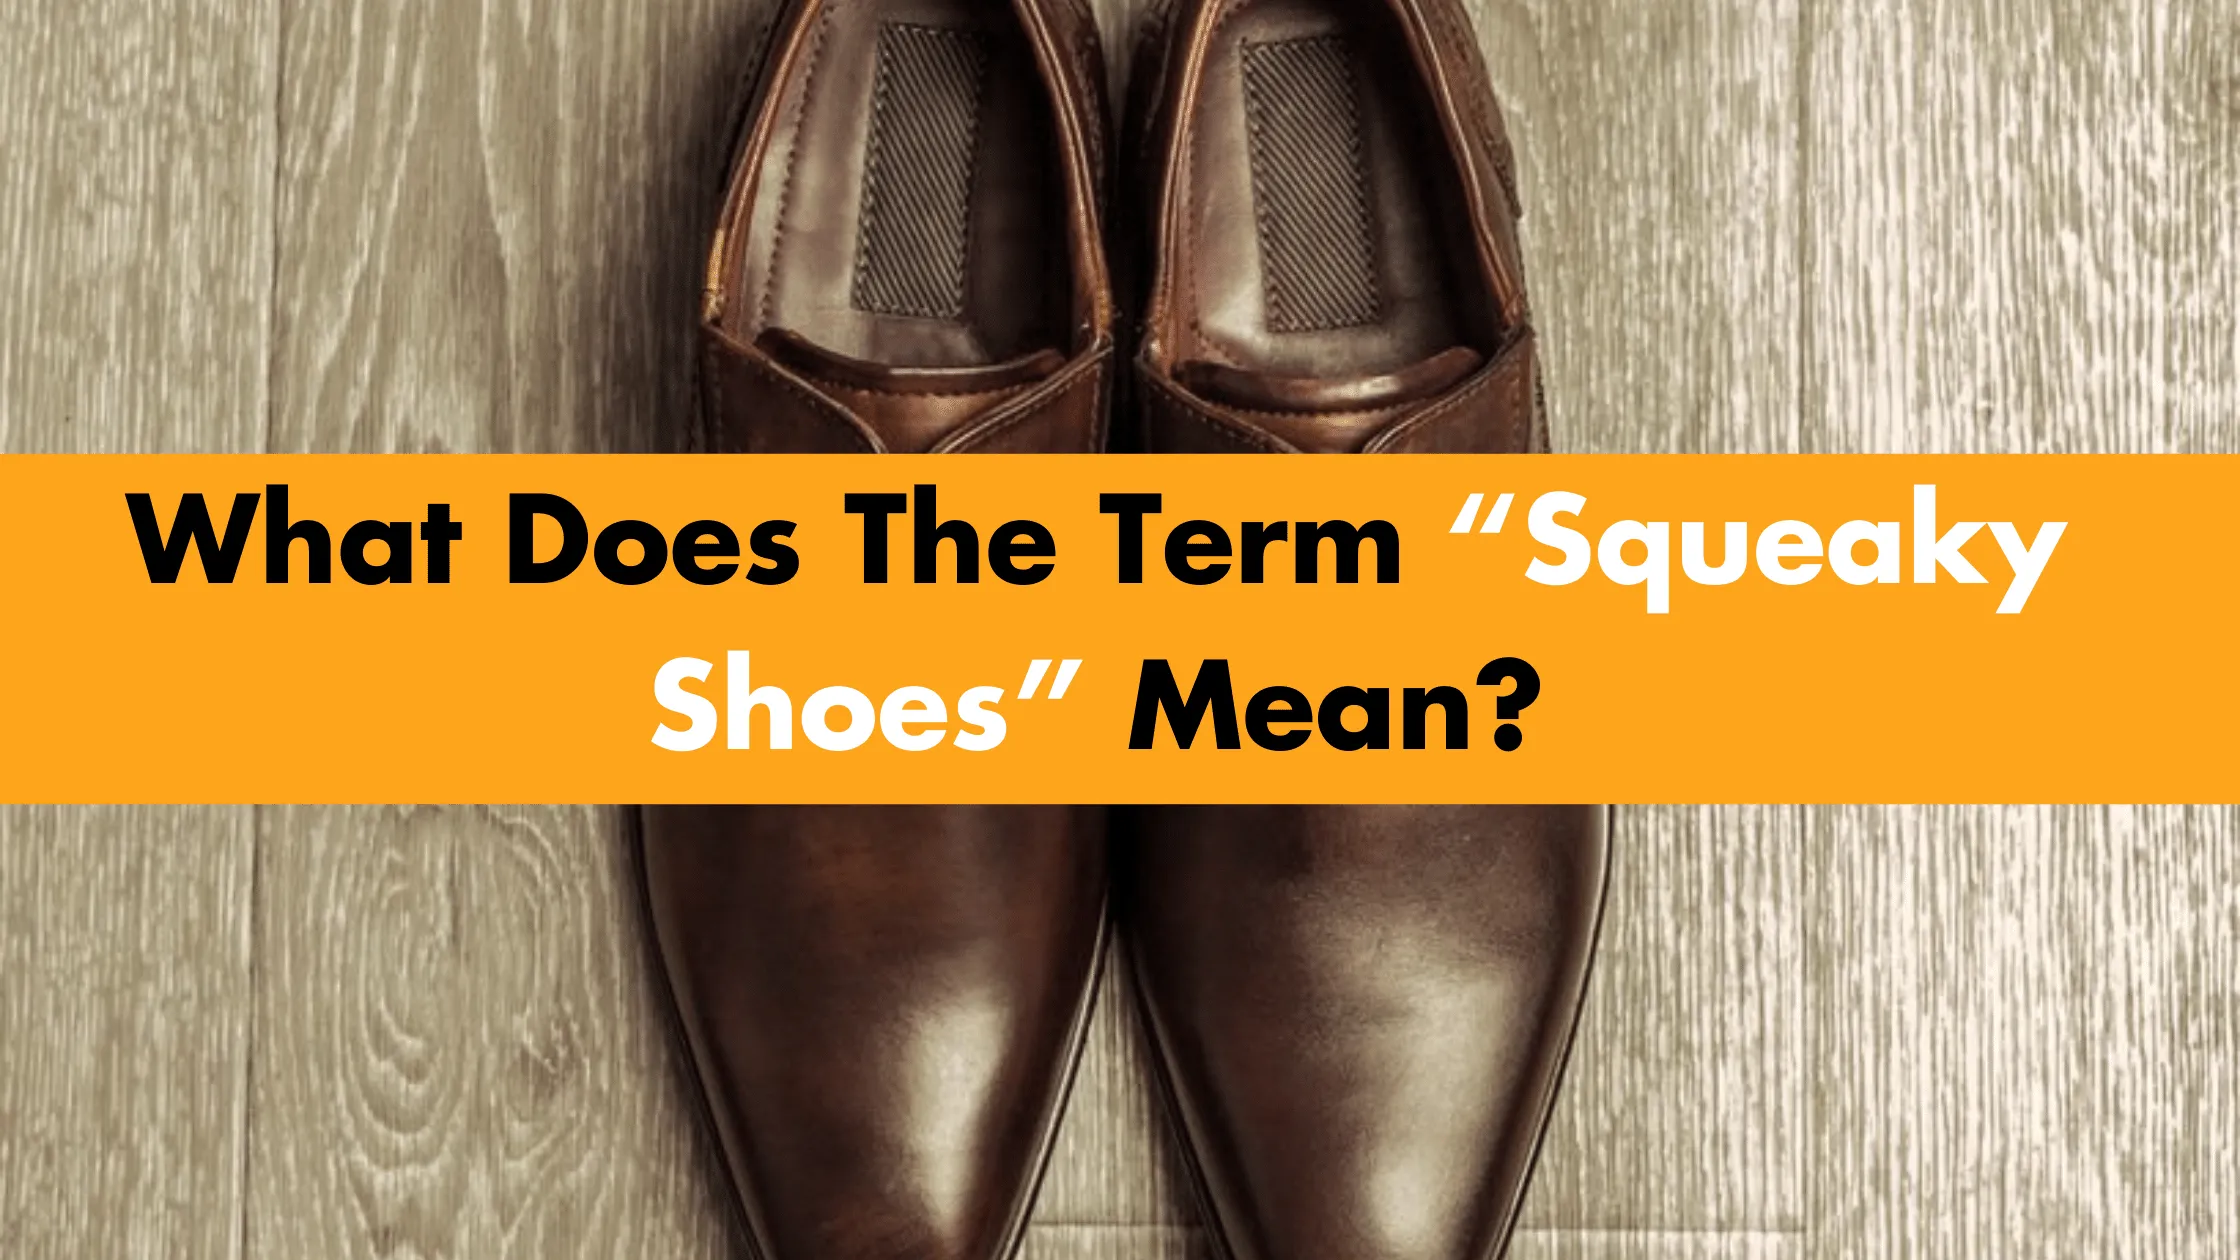 What Does The Term “Squeaky Shoes” Mean?